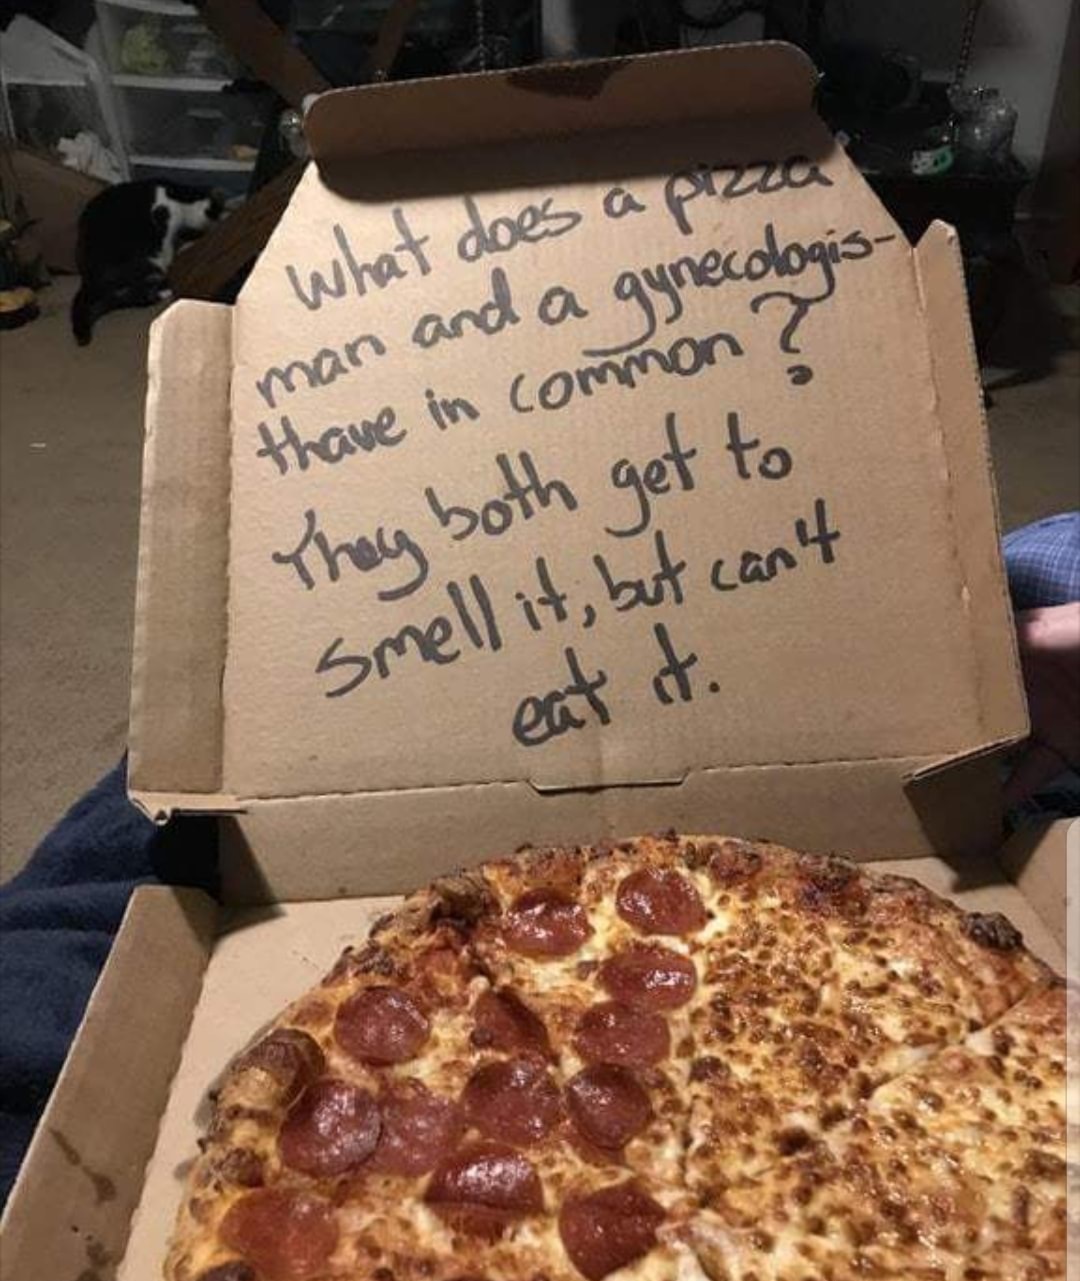 meme stream - pizza gynecologist joke - What does a pizza man and a gynecologis thave in common? They both get to smell it, but can't eat it.